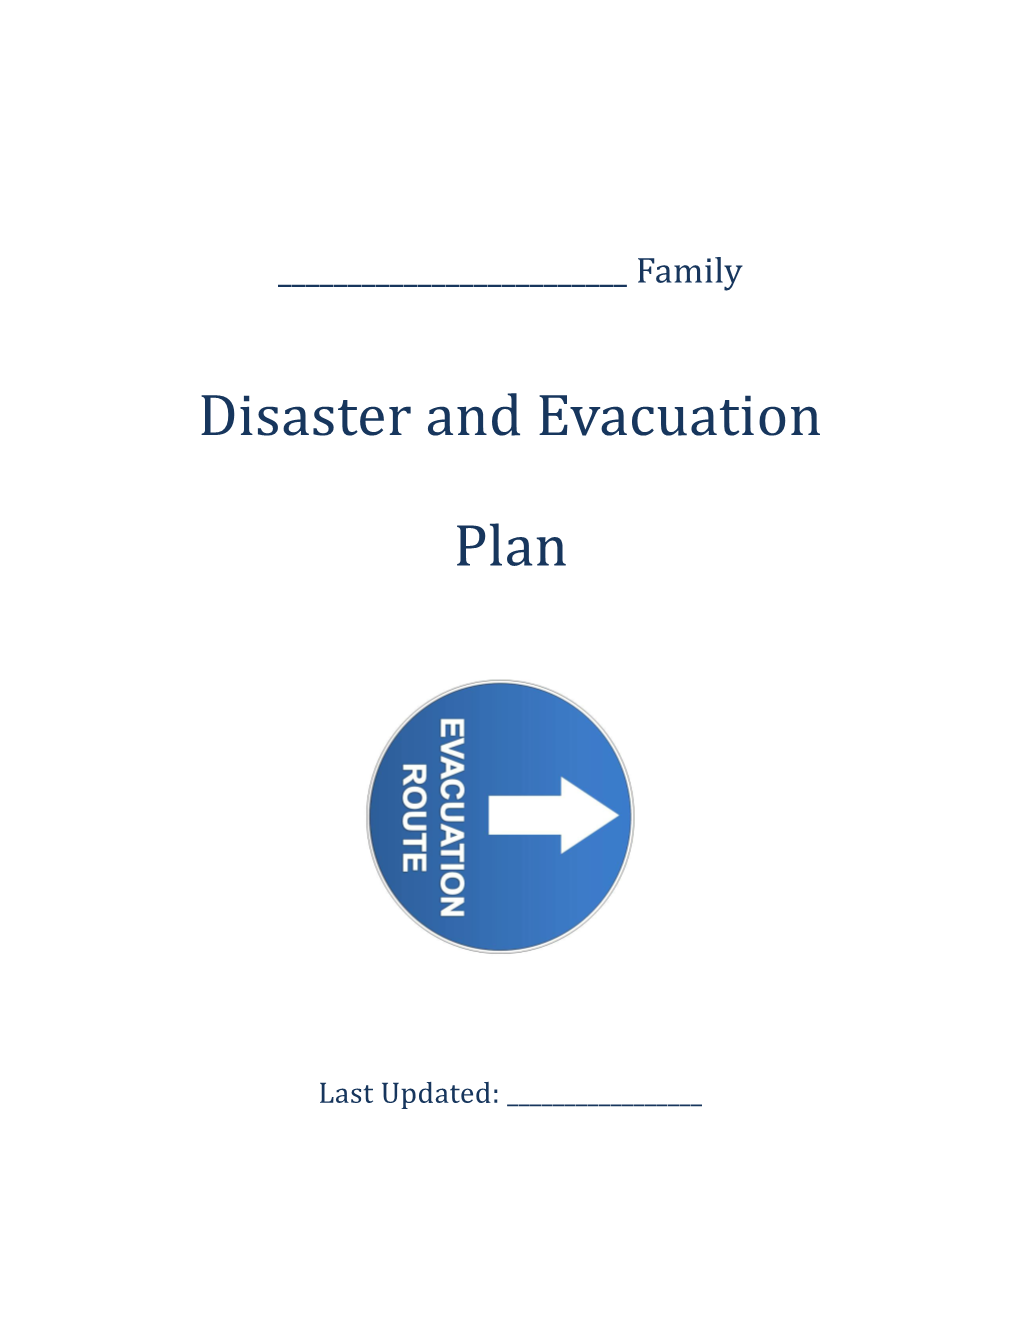 Family Disaster and Evacuation Plan